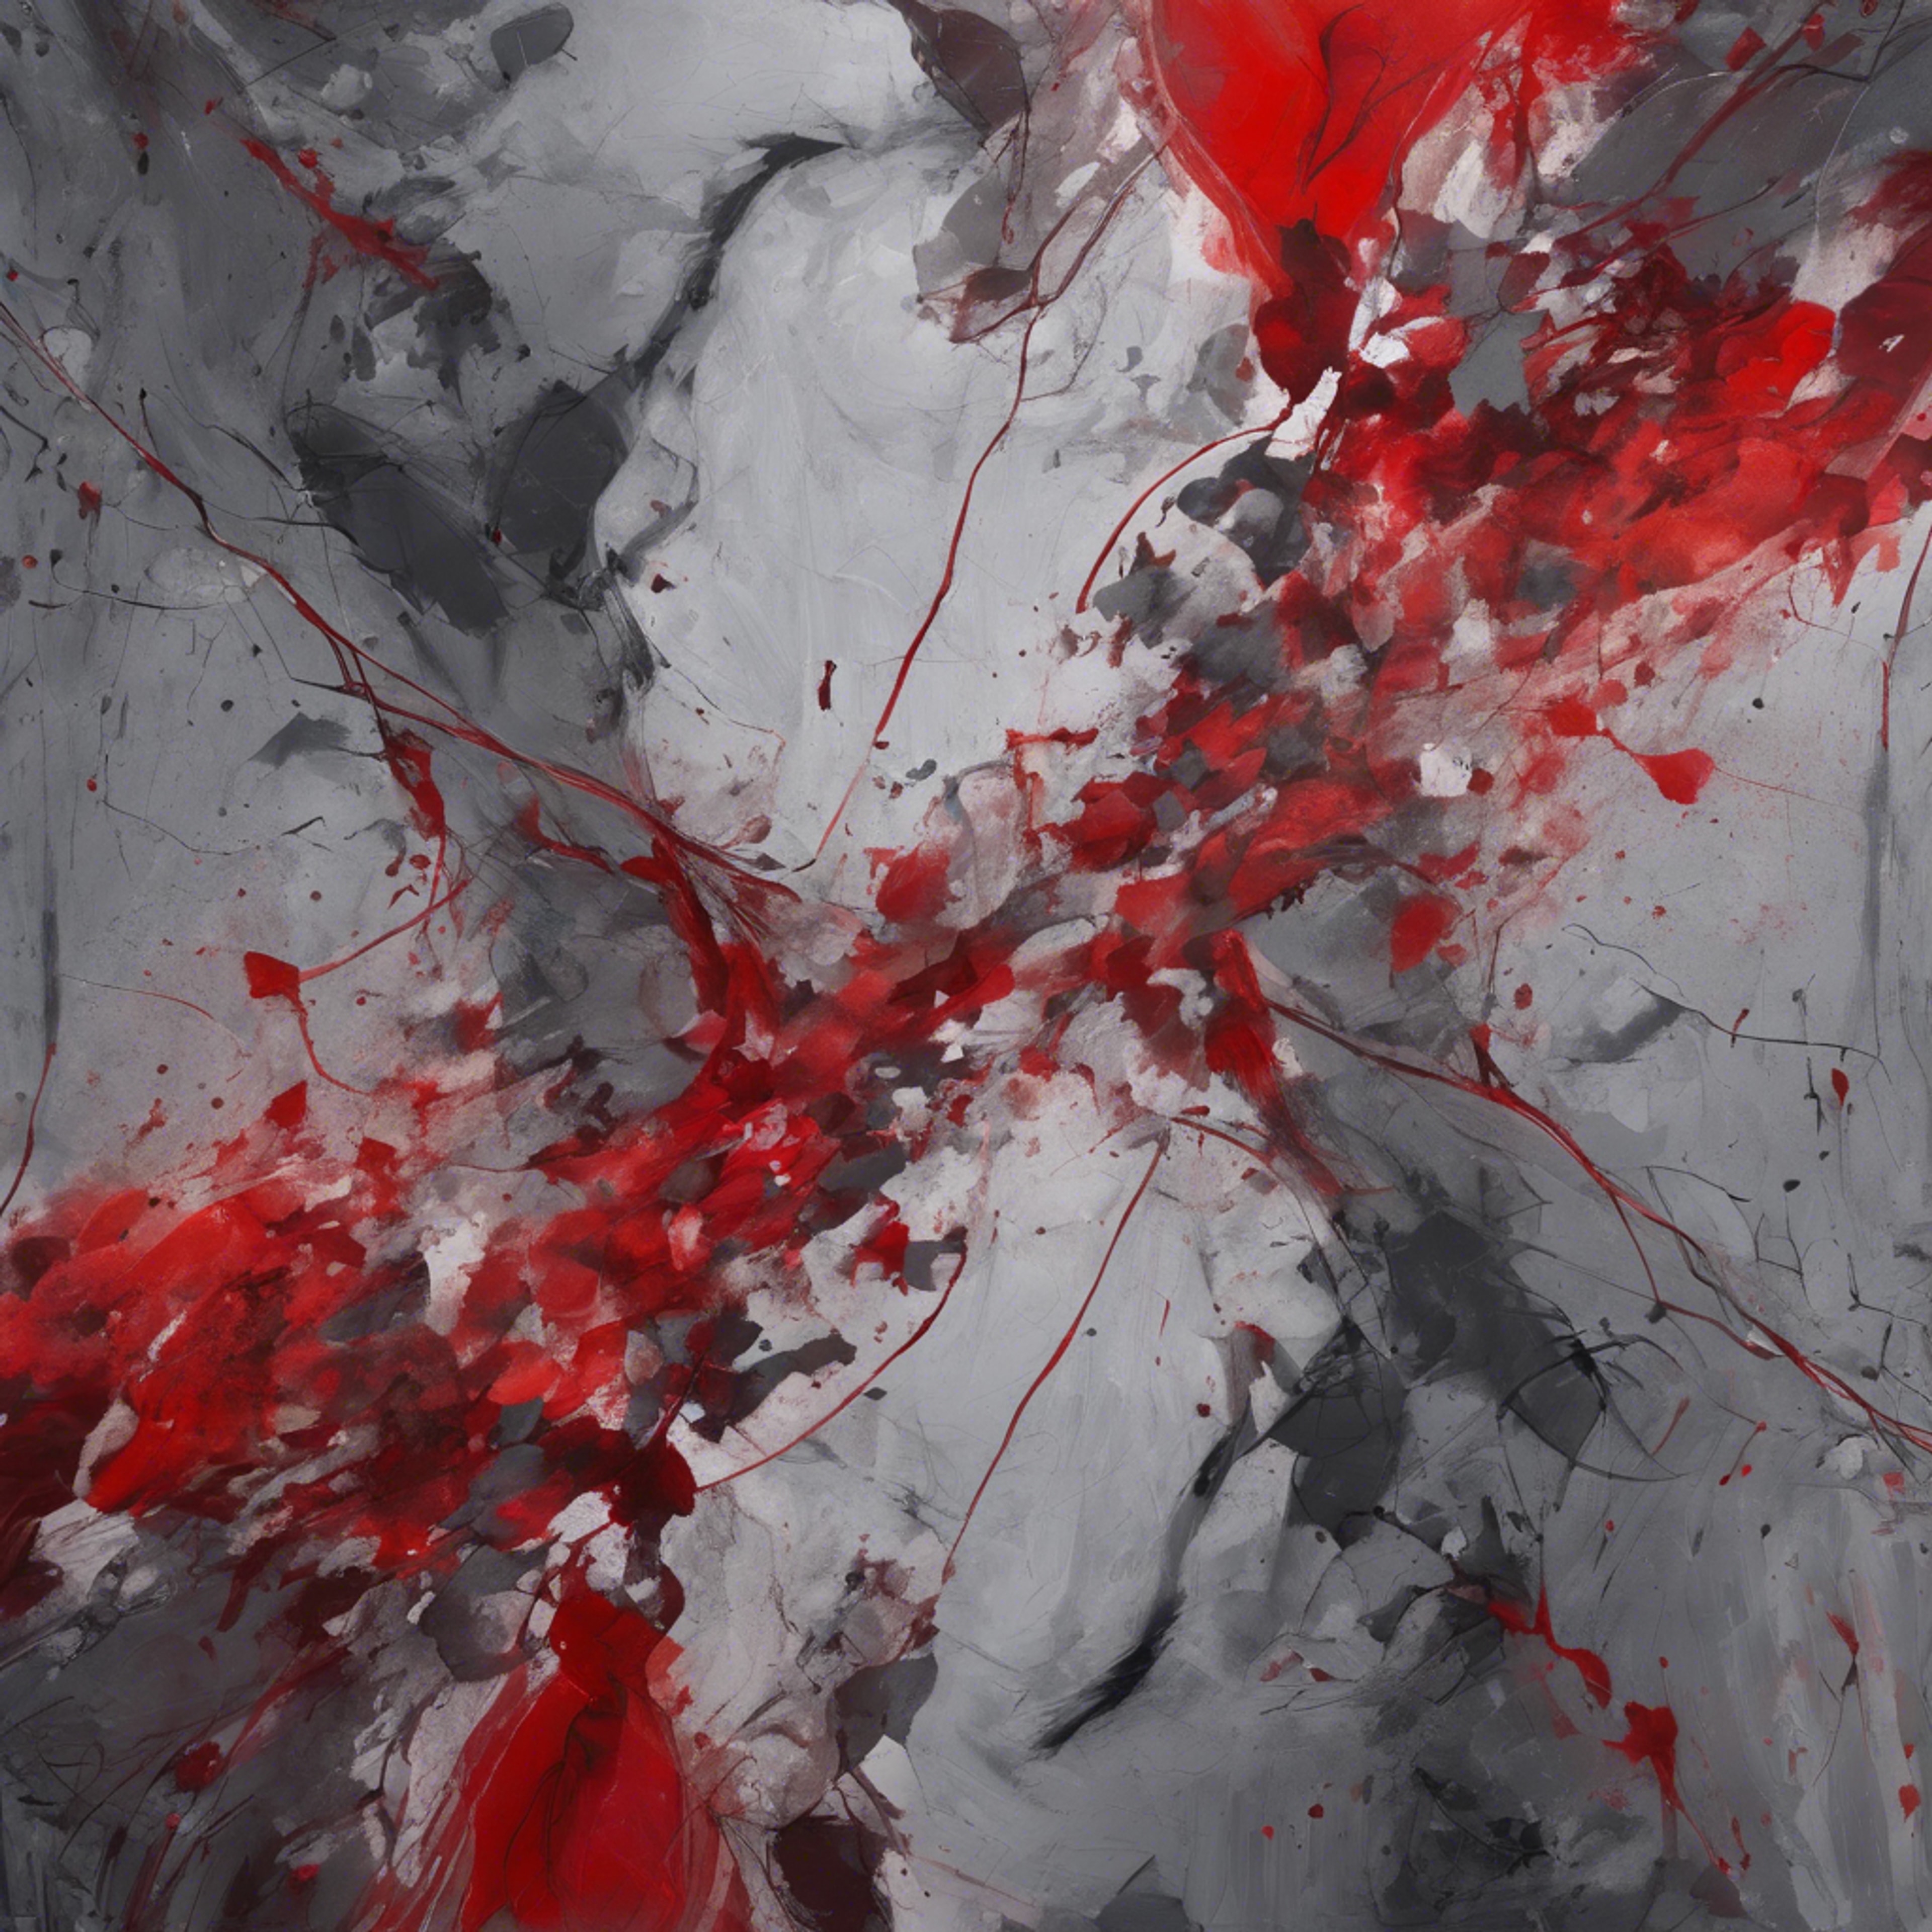 A red and gray abstract painting demonstrating the battle between passion and reason. Fondo de pantalla[fb490a5db02d428289d0]